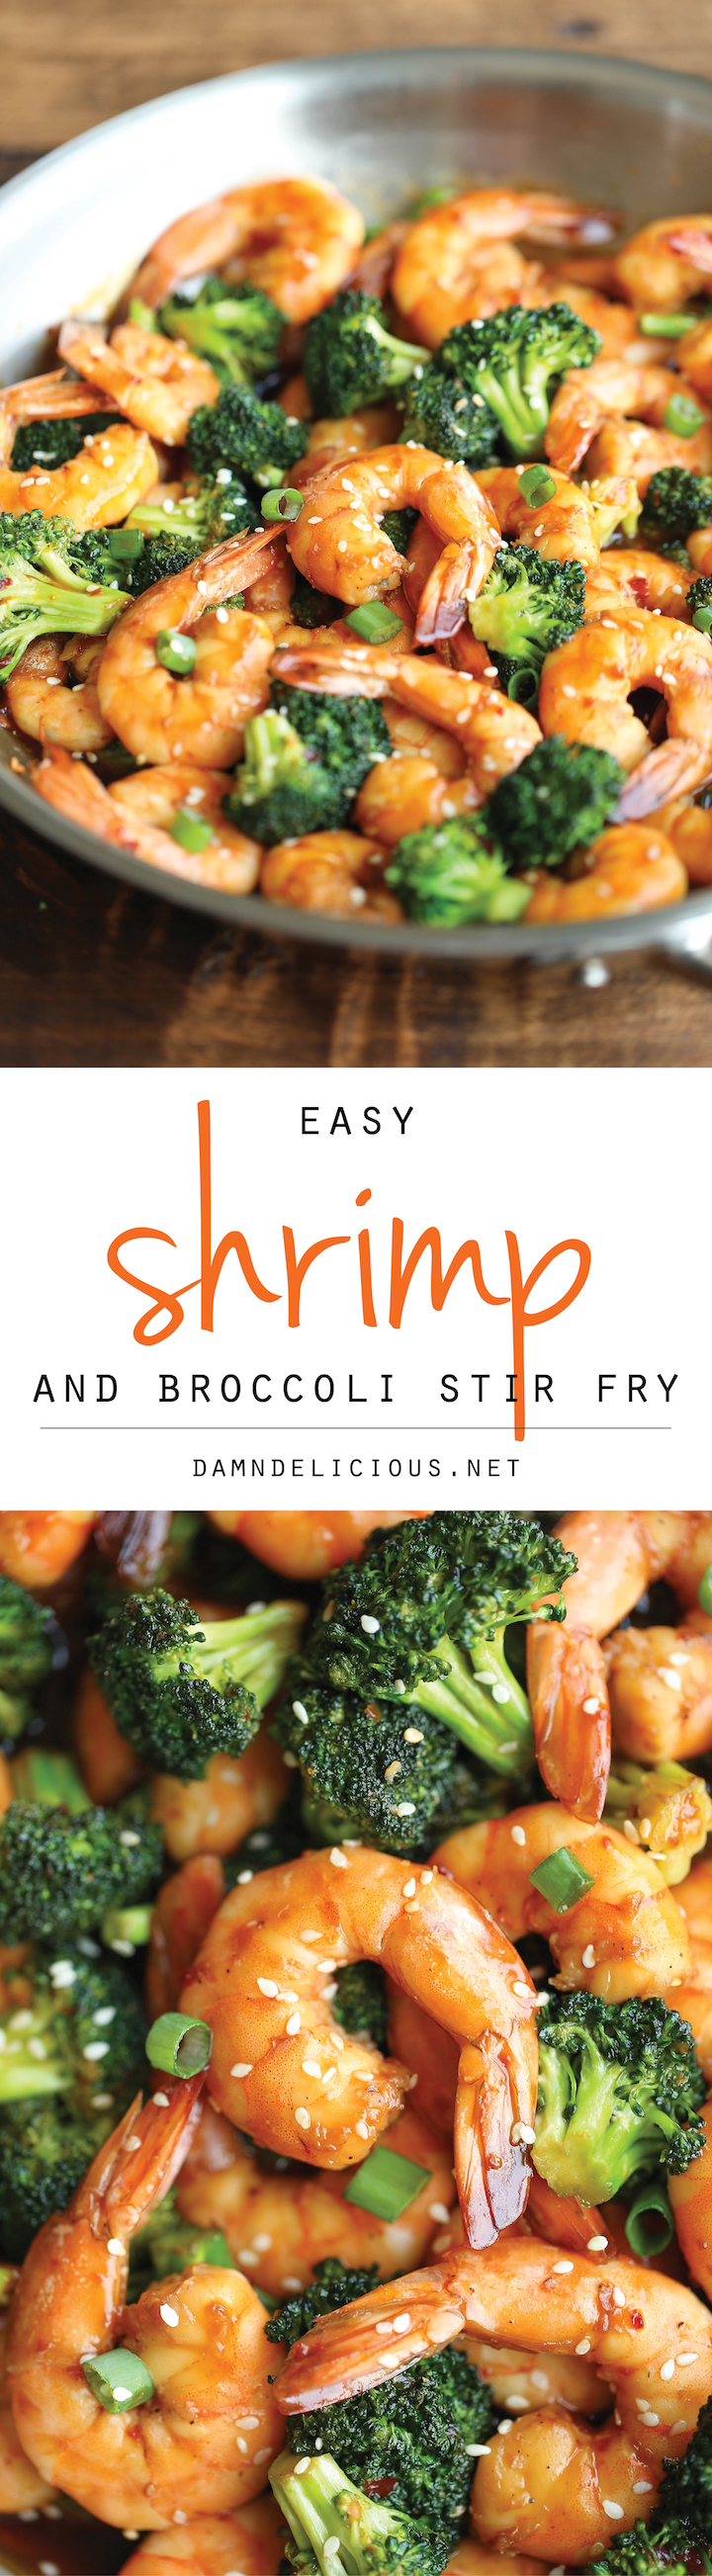 Easy Shrimp and Broccoli Stir Fry - The easiest stir fry you will ever make in just 20 min - it doesn't get easier (or quicker) than that! 287.3 calories.